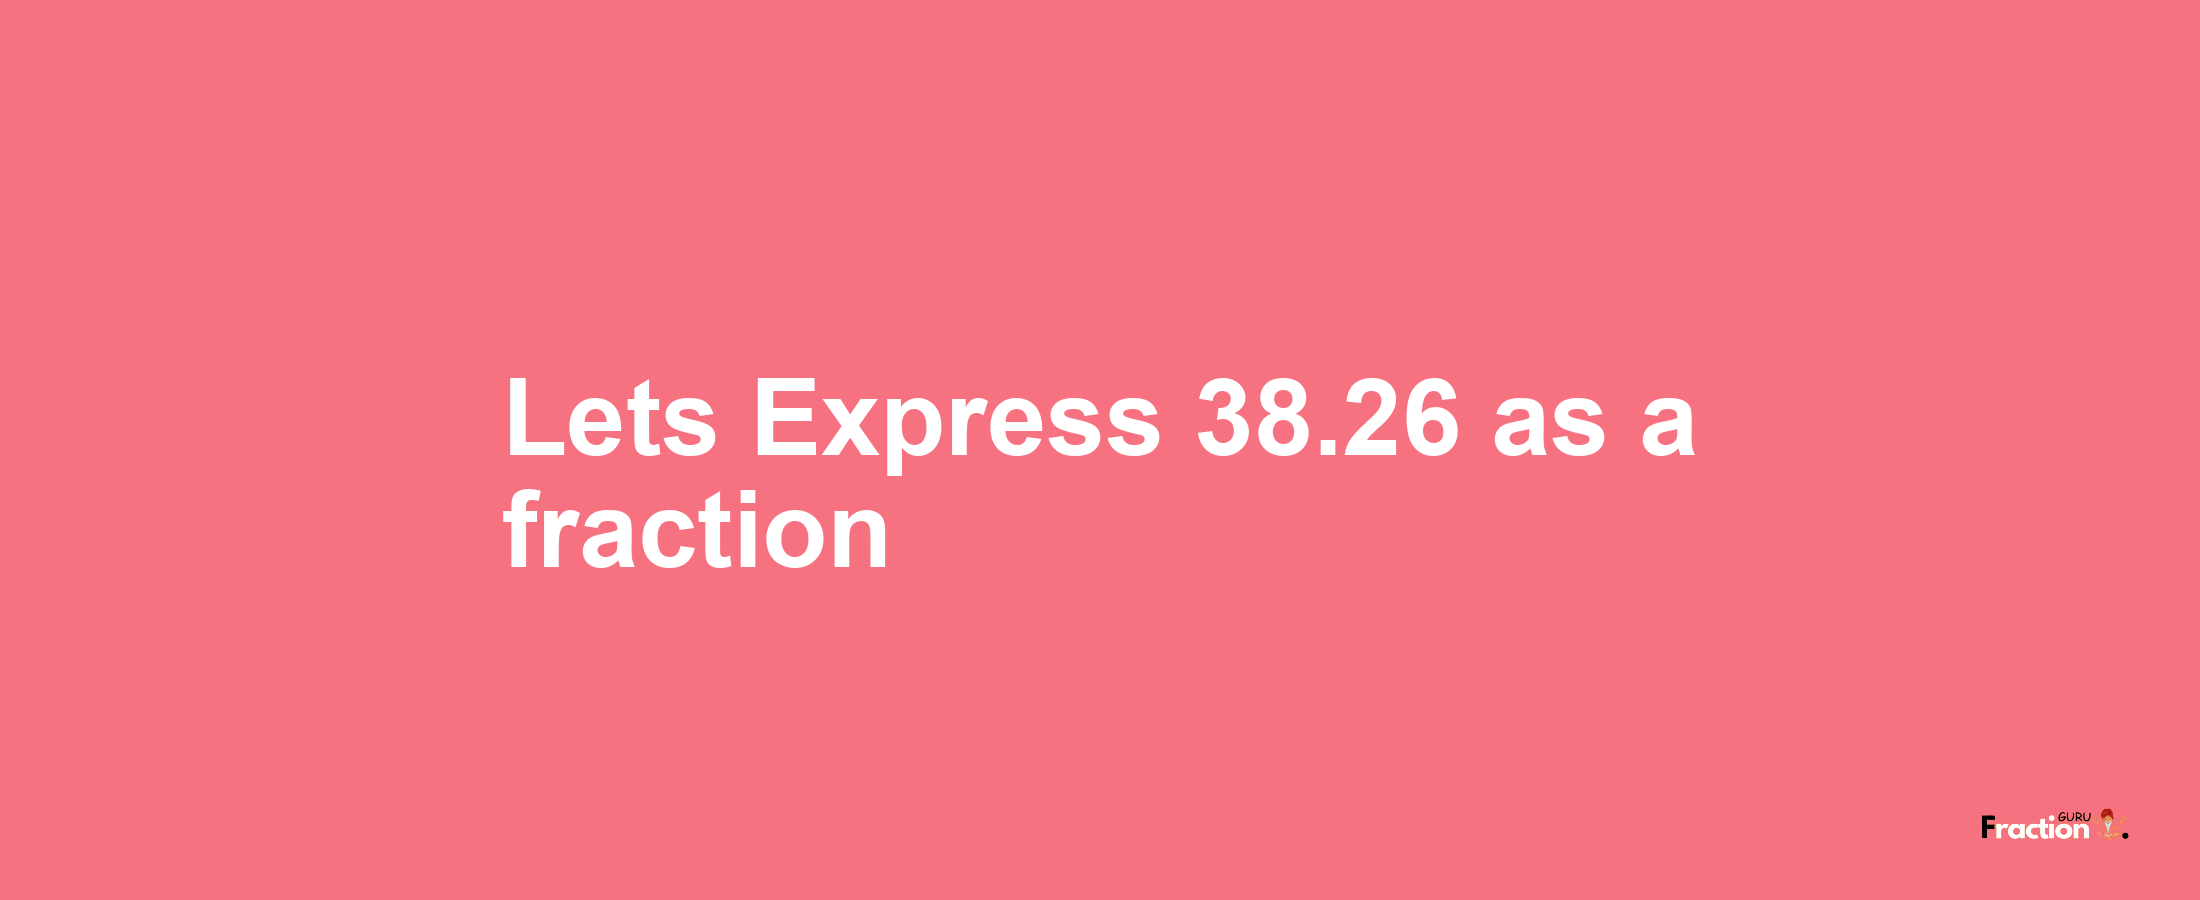 Lets Express 38.26 as afraction